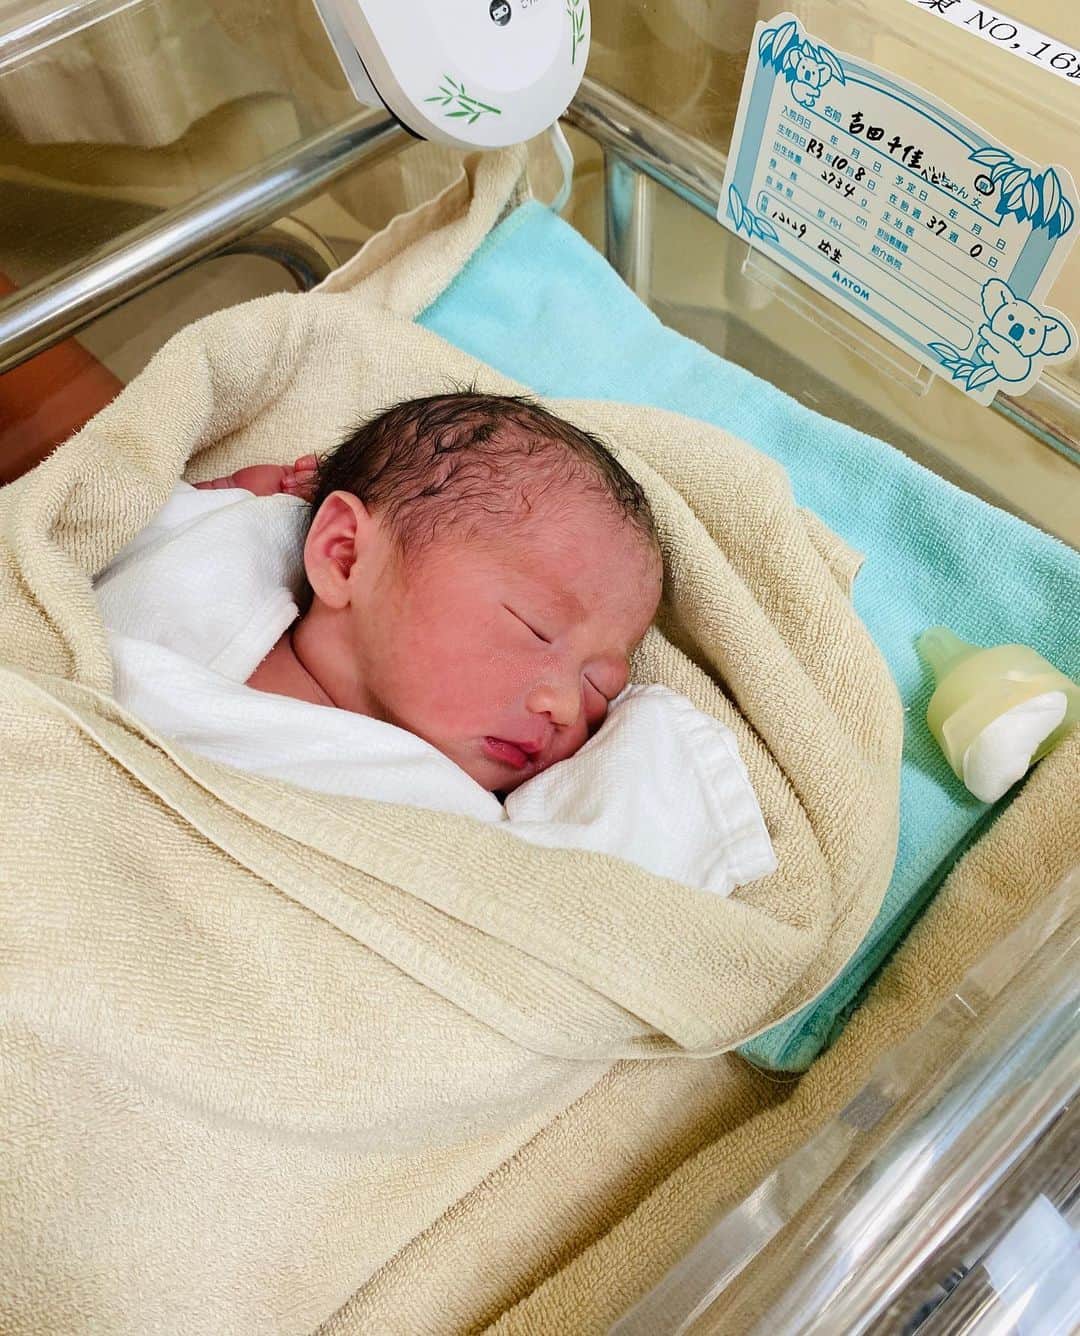 吉田ちかさんのインスタグラム写真 - (吉田ちかInstagram)「👶🏻💕✨Our baby is here✨💕👶🏻  This may come as a bit of a surprise since I was just posting about getting out of the hospital where I’ve been for the last two weeks getting bedrest to prevent preterm labor…  but here he is!!   I entered 37 weeks yesterday and with the baby safe to come out whenever, I was scheduled to go home. But around 3AM I went into labor! And a little past 1PM, I gave birth to a healthy baby boy! It was like he was saying, “Hey, you said I could come out whenever now!”  All in all, we had a very safe delivery, but the labor pains were of course brutal and our baby was in breech position so that made for a unique delivery, and there were definitely moments when I didn’t think I could get through it.   With covid, I couldn’t have osaru-san with me like last time, but the doctors and nurses were extremely supportive and encouraging, and with their help we were  able to safely welcome our baby into the world!  Just two days ago, I was hoping to go home to see Pudding and organize the house a bit, but come to think of it, I probably would’t have gotten much done with the big belly and Pudding would have probably been like “why isn’t the baby born yet?! You have to go back to the hospital again?! “  So even though I won’t get to see Pudding for a little while longer, at least now when I go home next week I’ll have her little brother with me💕   I think it all worked out in the end. Looks like our little boy was thinking about his big sister even before he was born!!   前回の投稿では退院の話をしていたので、突然すぎてびっくりかもですが😅 昨日元気な男の子が産まれました！  実は、昨日で妊娠37週に入り、赤ちゃんがいつ産まれてもいい時期になったので一旦退院する予定だったのですが、夜中の3時にまさかの陣痛‼️そして、13時過ぎに元気な男の子が産まれました❤️  安産ではありましたが、陣痛の痛みはもちろん辛くて、逆子の経膣分娩という比較的珍しいお産だったということもあり、後半は心が折れそうになった瞬間もありました😭   コロナ禍で前回のようにおさるさんに立ち会ってもらうこともできず、少し不安もありましたが、優しい先生たちと助産師さんさんたちがずっと支えてくれて、無事に産むことができました。  一昨日までは、一旦退院してプリンに会って、家を少し整えたいと思っていましたが😅 実際帰ったところで大きなお腹では何もできなかっただろうし、プリンも「なんでまだ産まれてないの？？また病院に行くの？？」ってなったかと思いますw   プリンにはもう少し我慢してもらうことになりますが、来週会う時にはbabyと一緒にお家に帰れる💕その方が結果良かったのかも！既にお姉ちゃん想いのベビーです👶🏻✨  皆さん、沢山の応援メッセージありがとうございました❤️本日、午後から母子同室なにるので、楽しみです😆」10月9日 11時52分 - bilingirl_chika